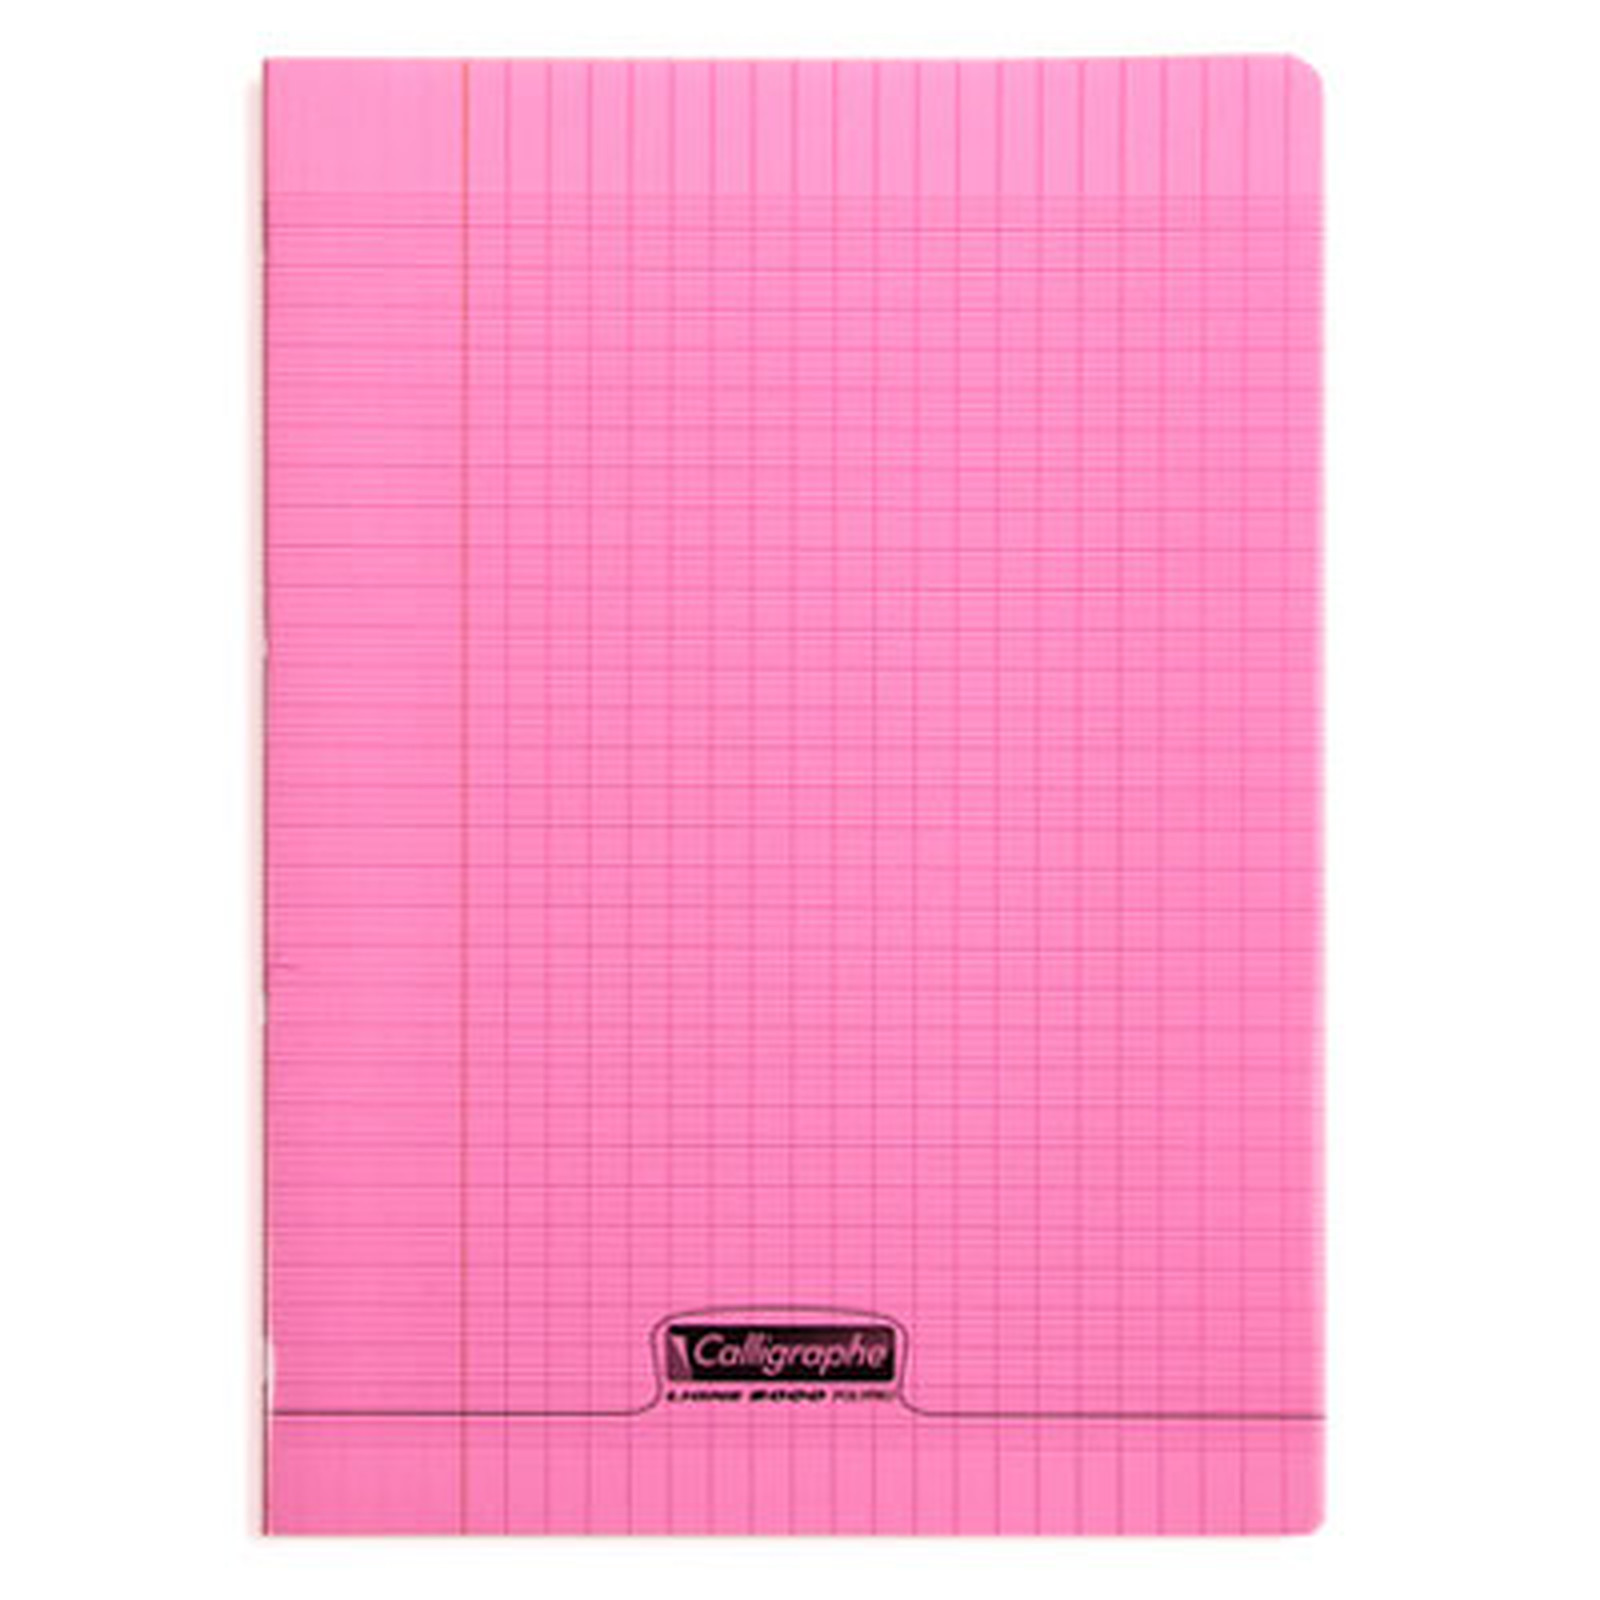 Calligraphe 8000 Polypro Cahier 96 pages 21 x 29.7 cm seyes grands carreaux Rose - Cahier Calligraphe